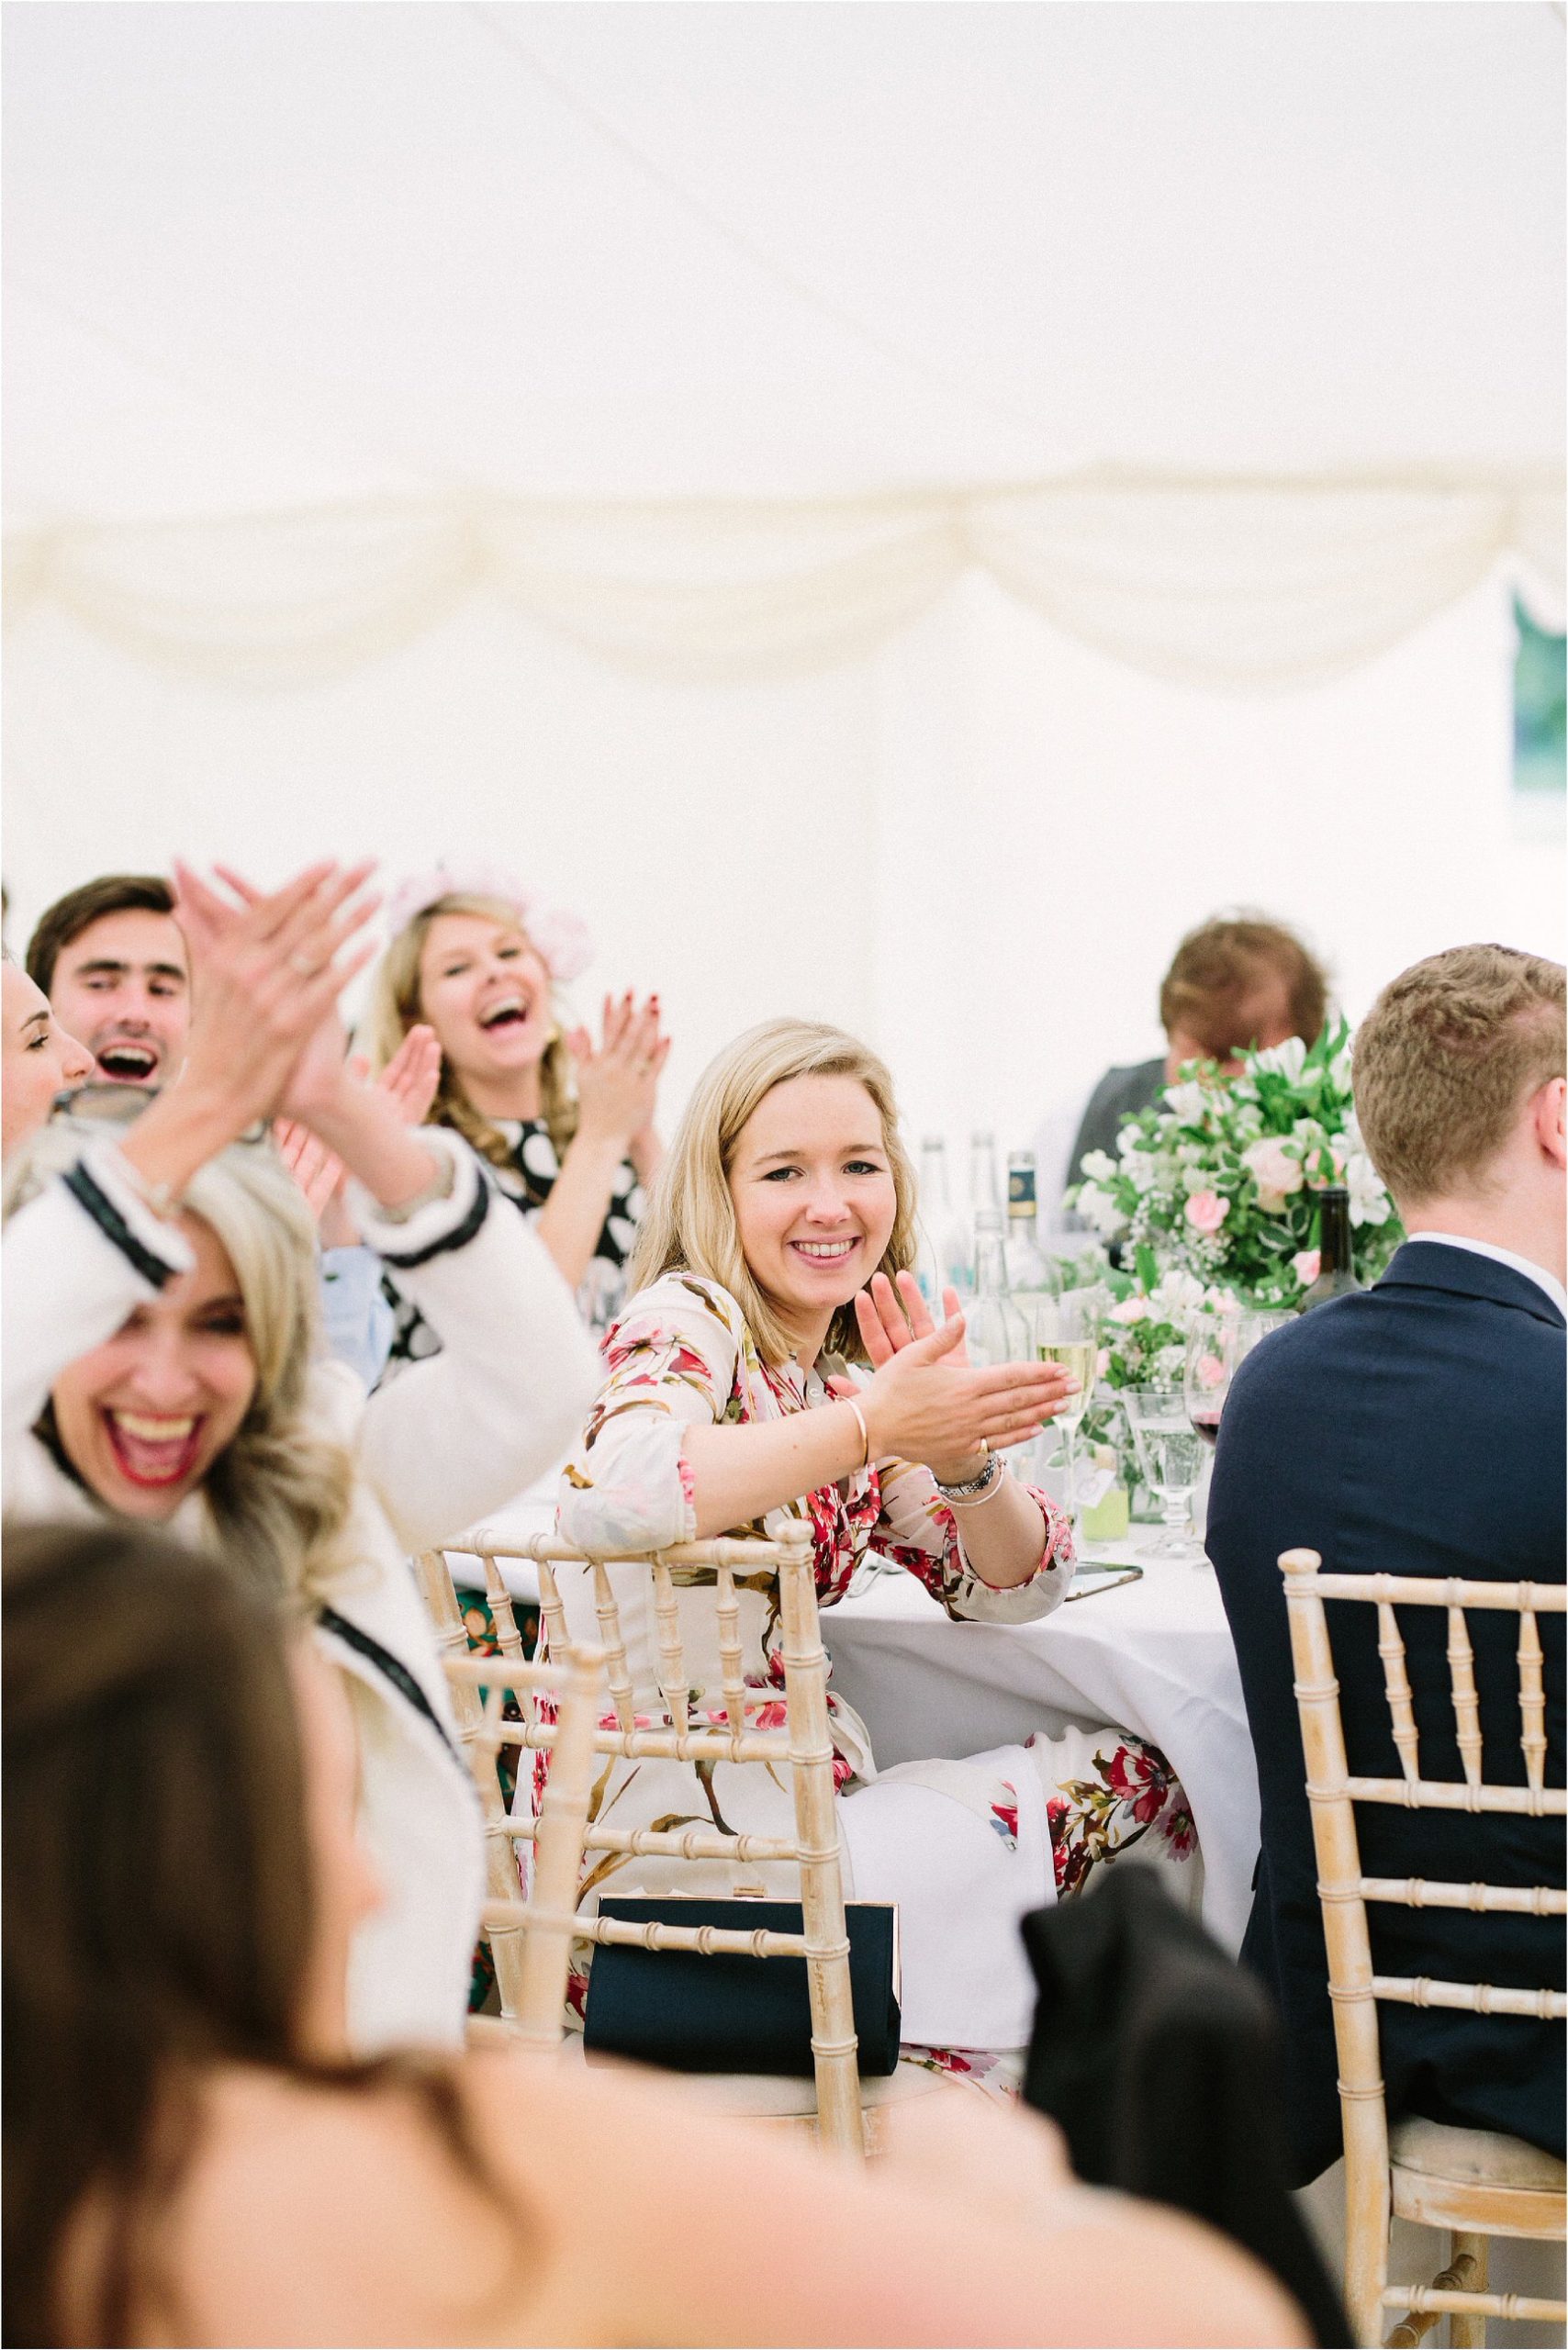 Wedding guests smiling and clapping during speeches